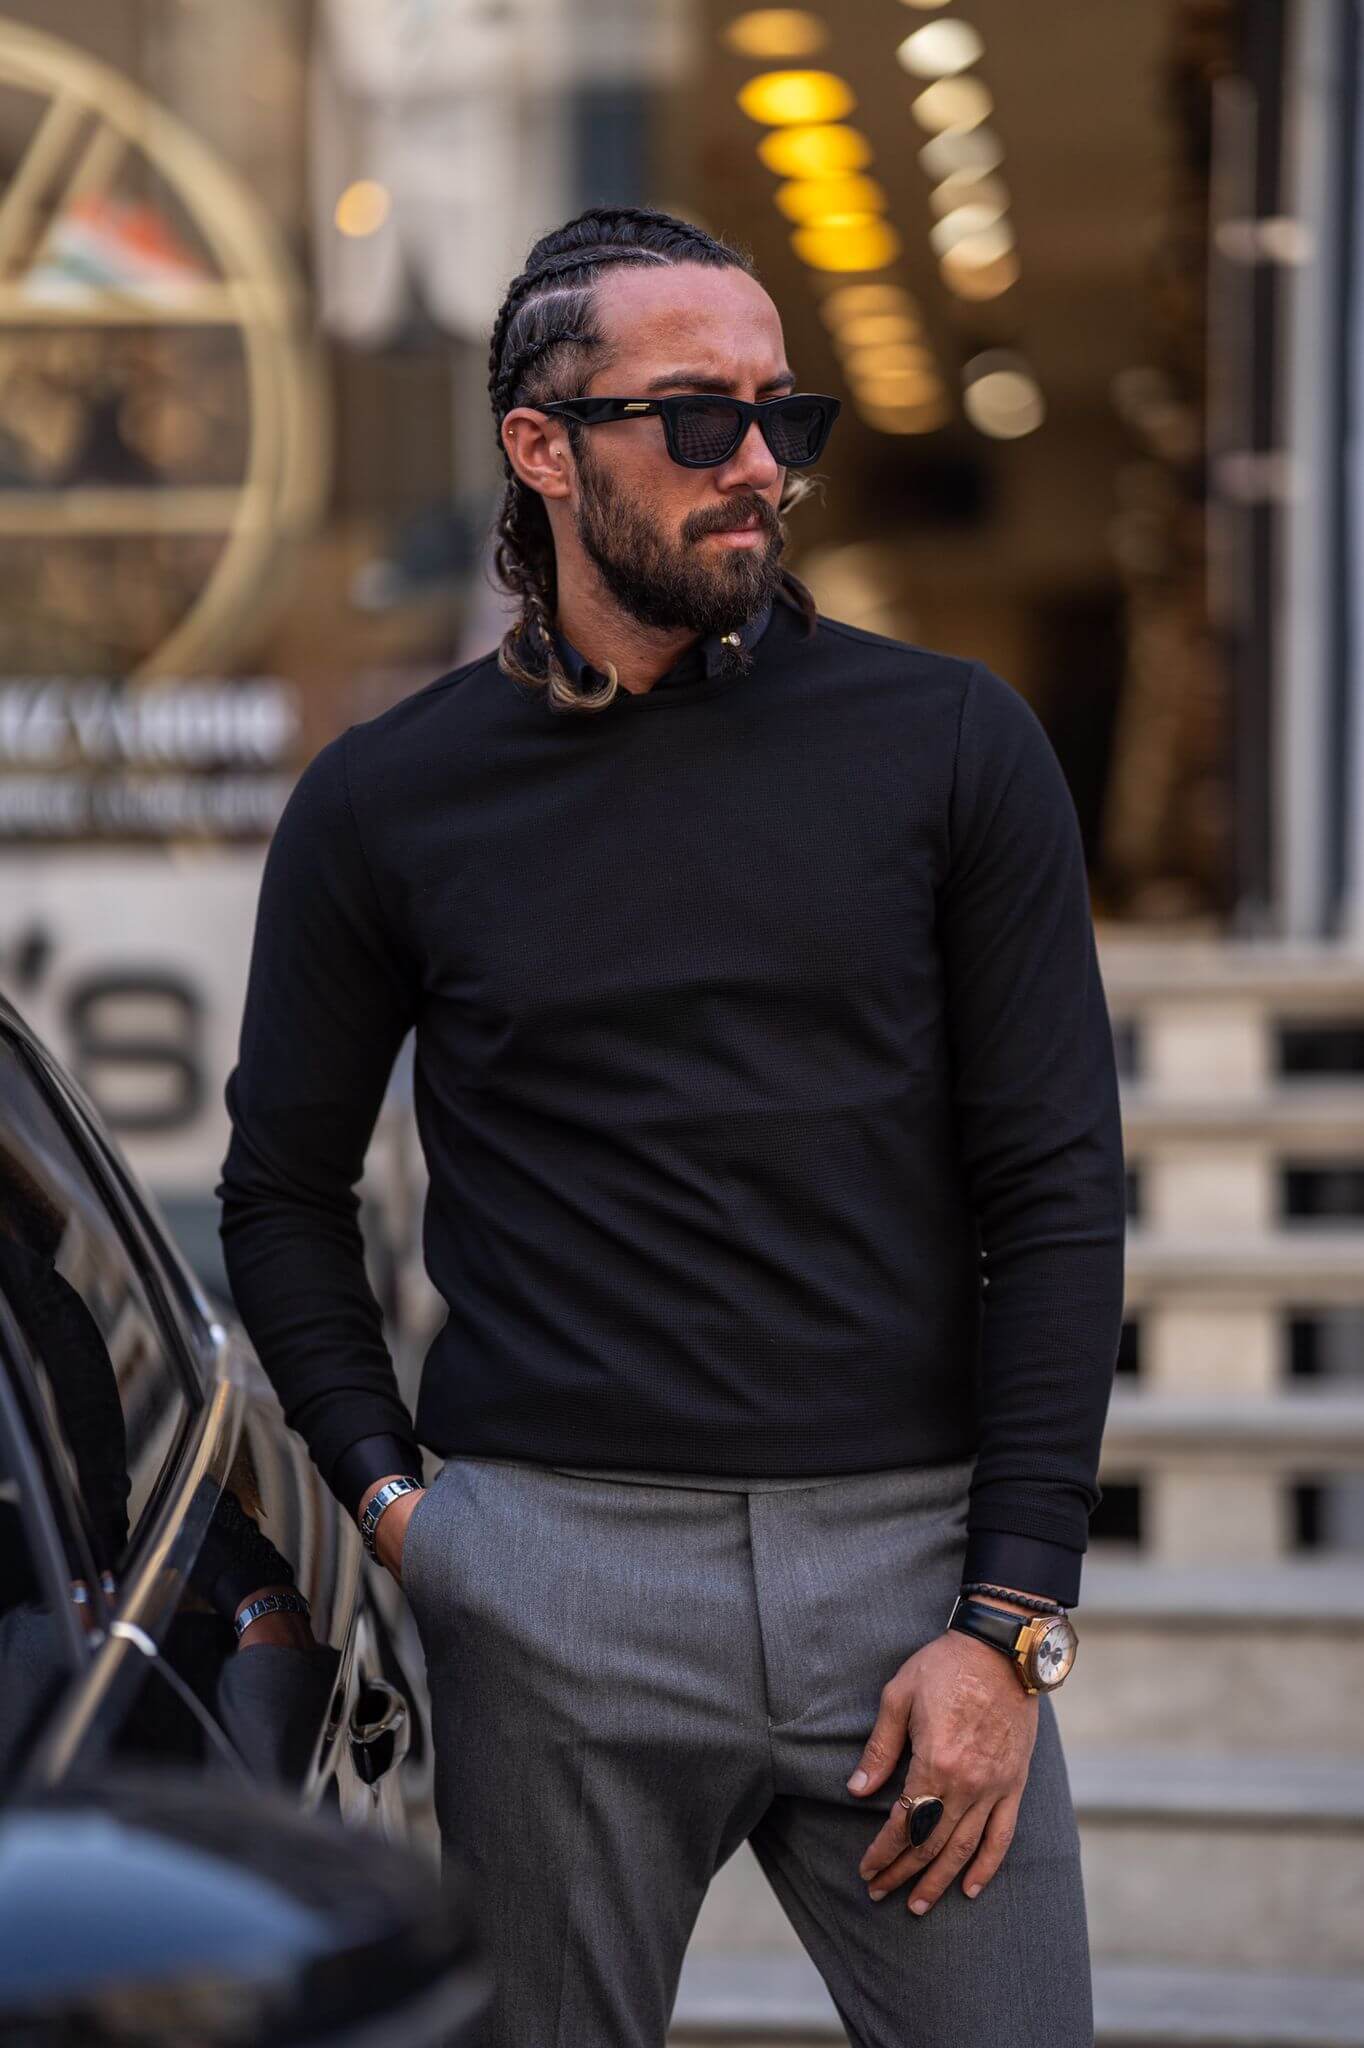 Casually chic: Our male model effortlessly rocks a black crewneck, epitomizing laid-back elegance.